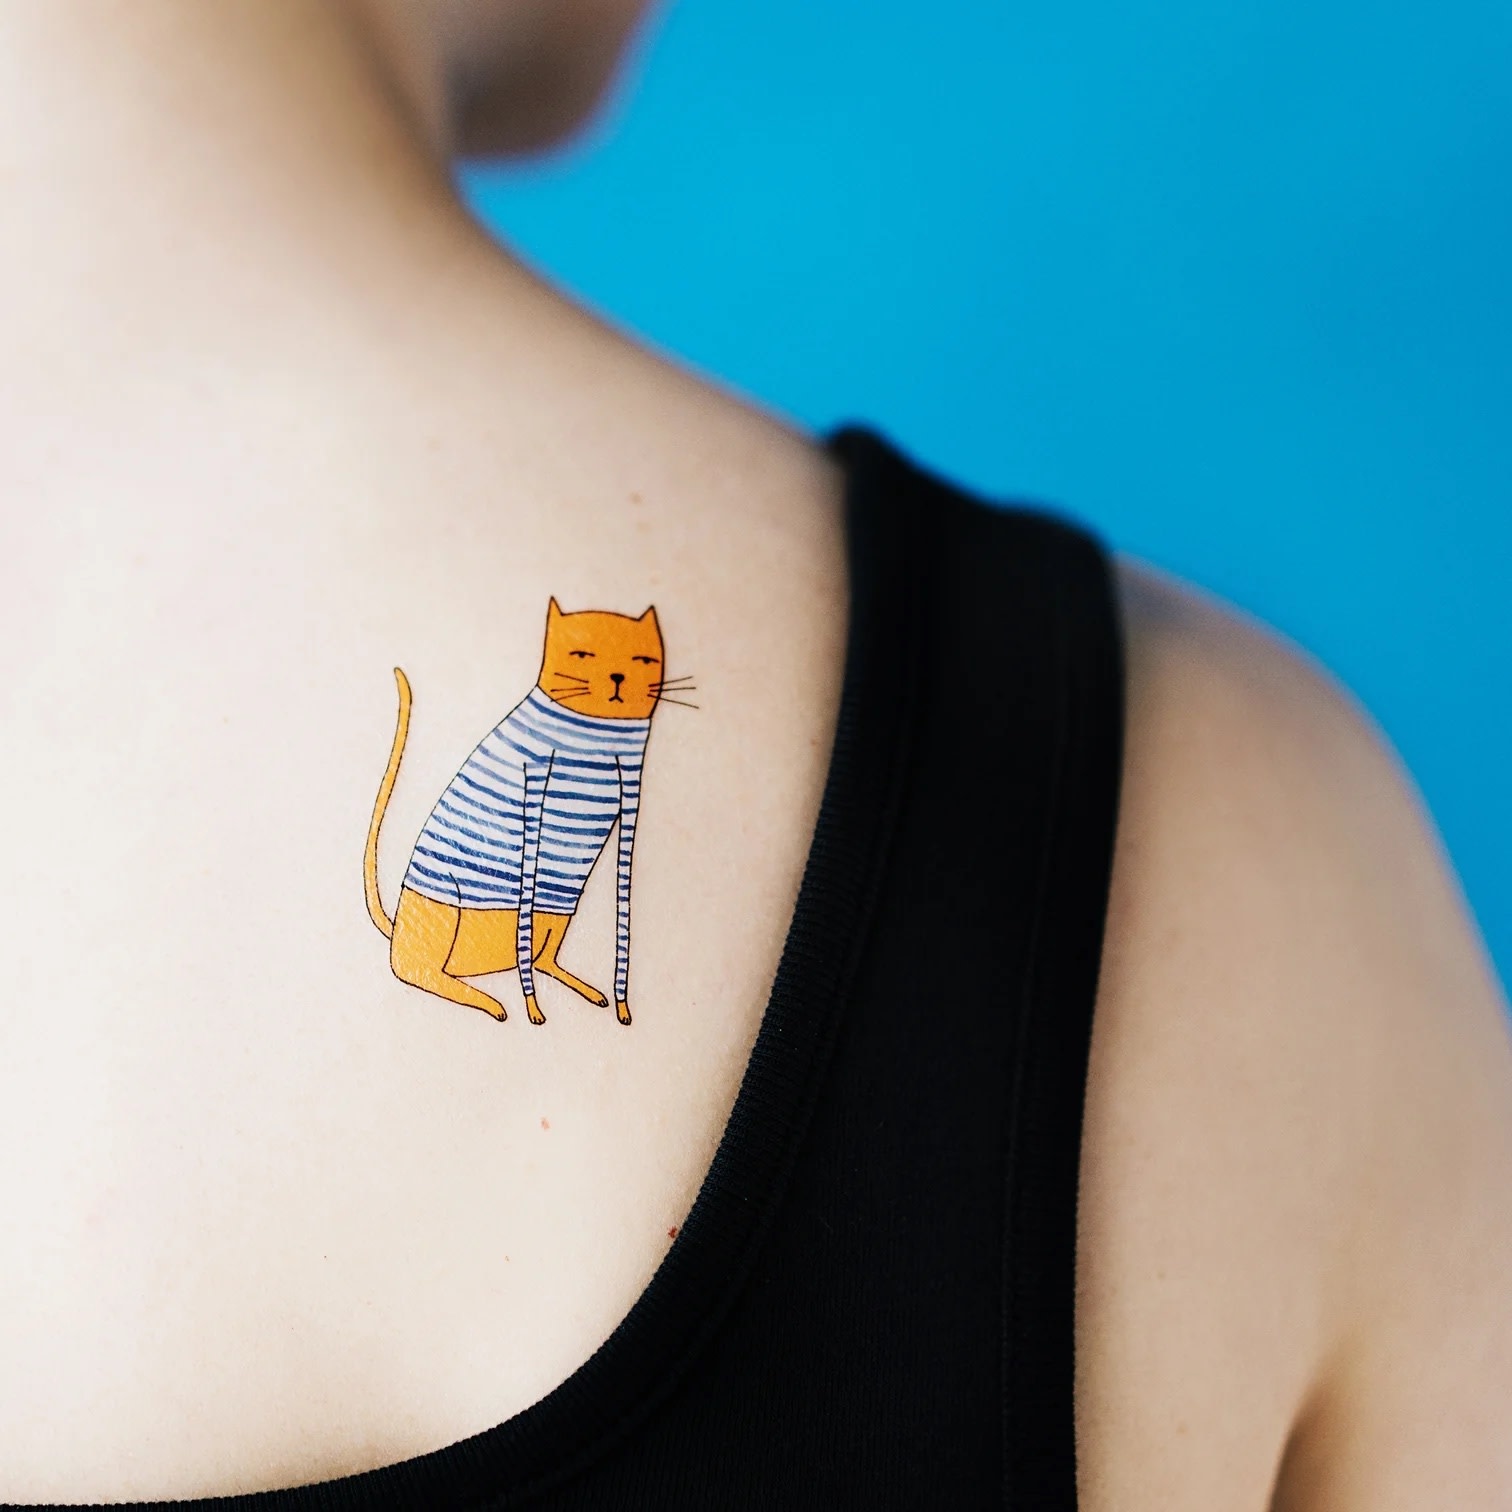 tattoo of a blue cat on shoulder